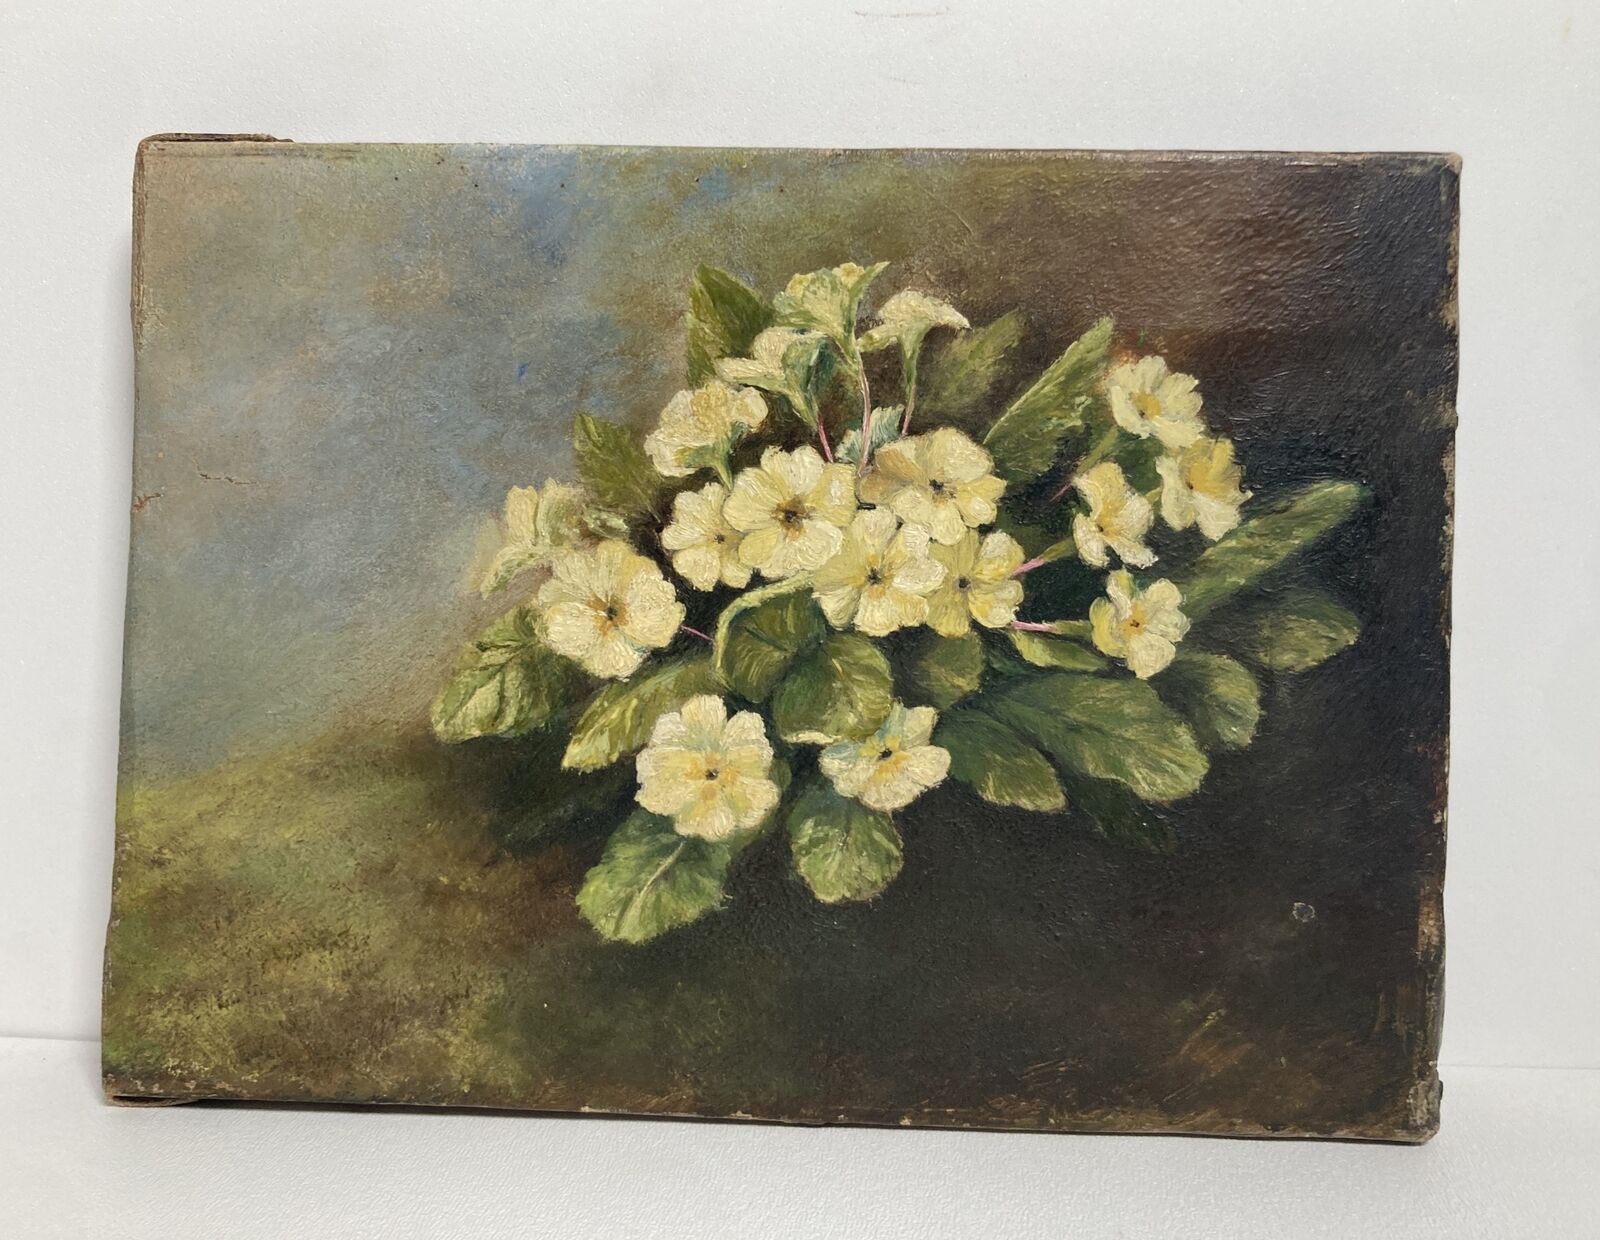 Antique Original Miniature Oil Painting Canvas -Still Life with Flowers -Signed